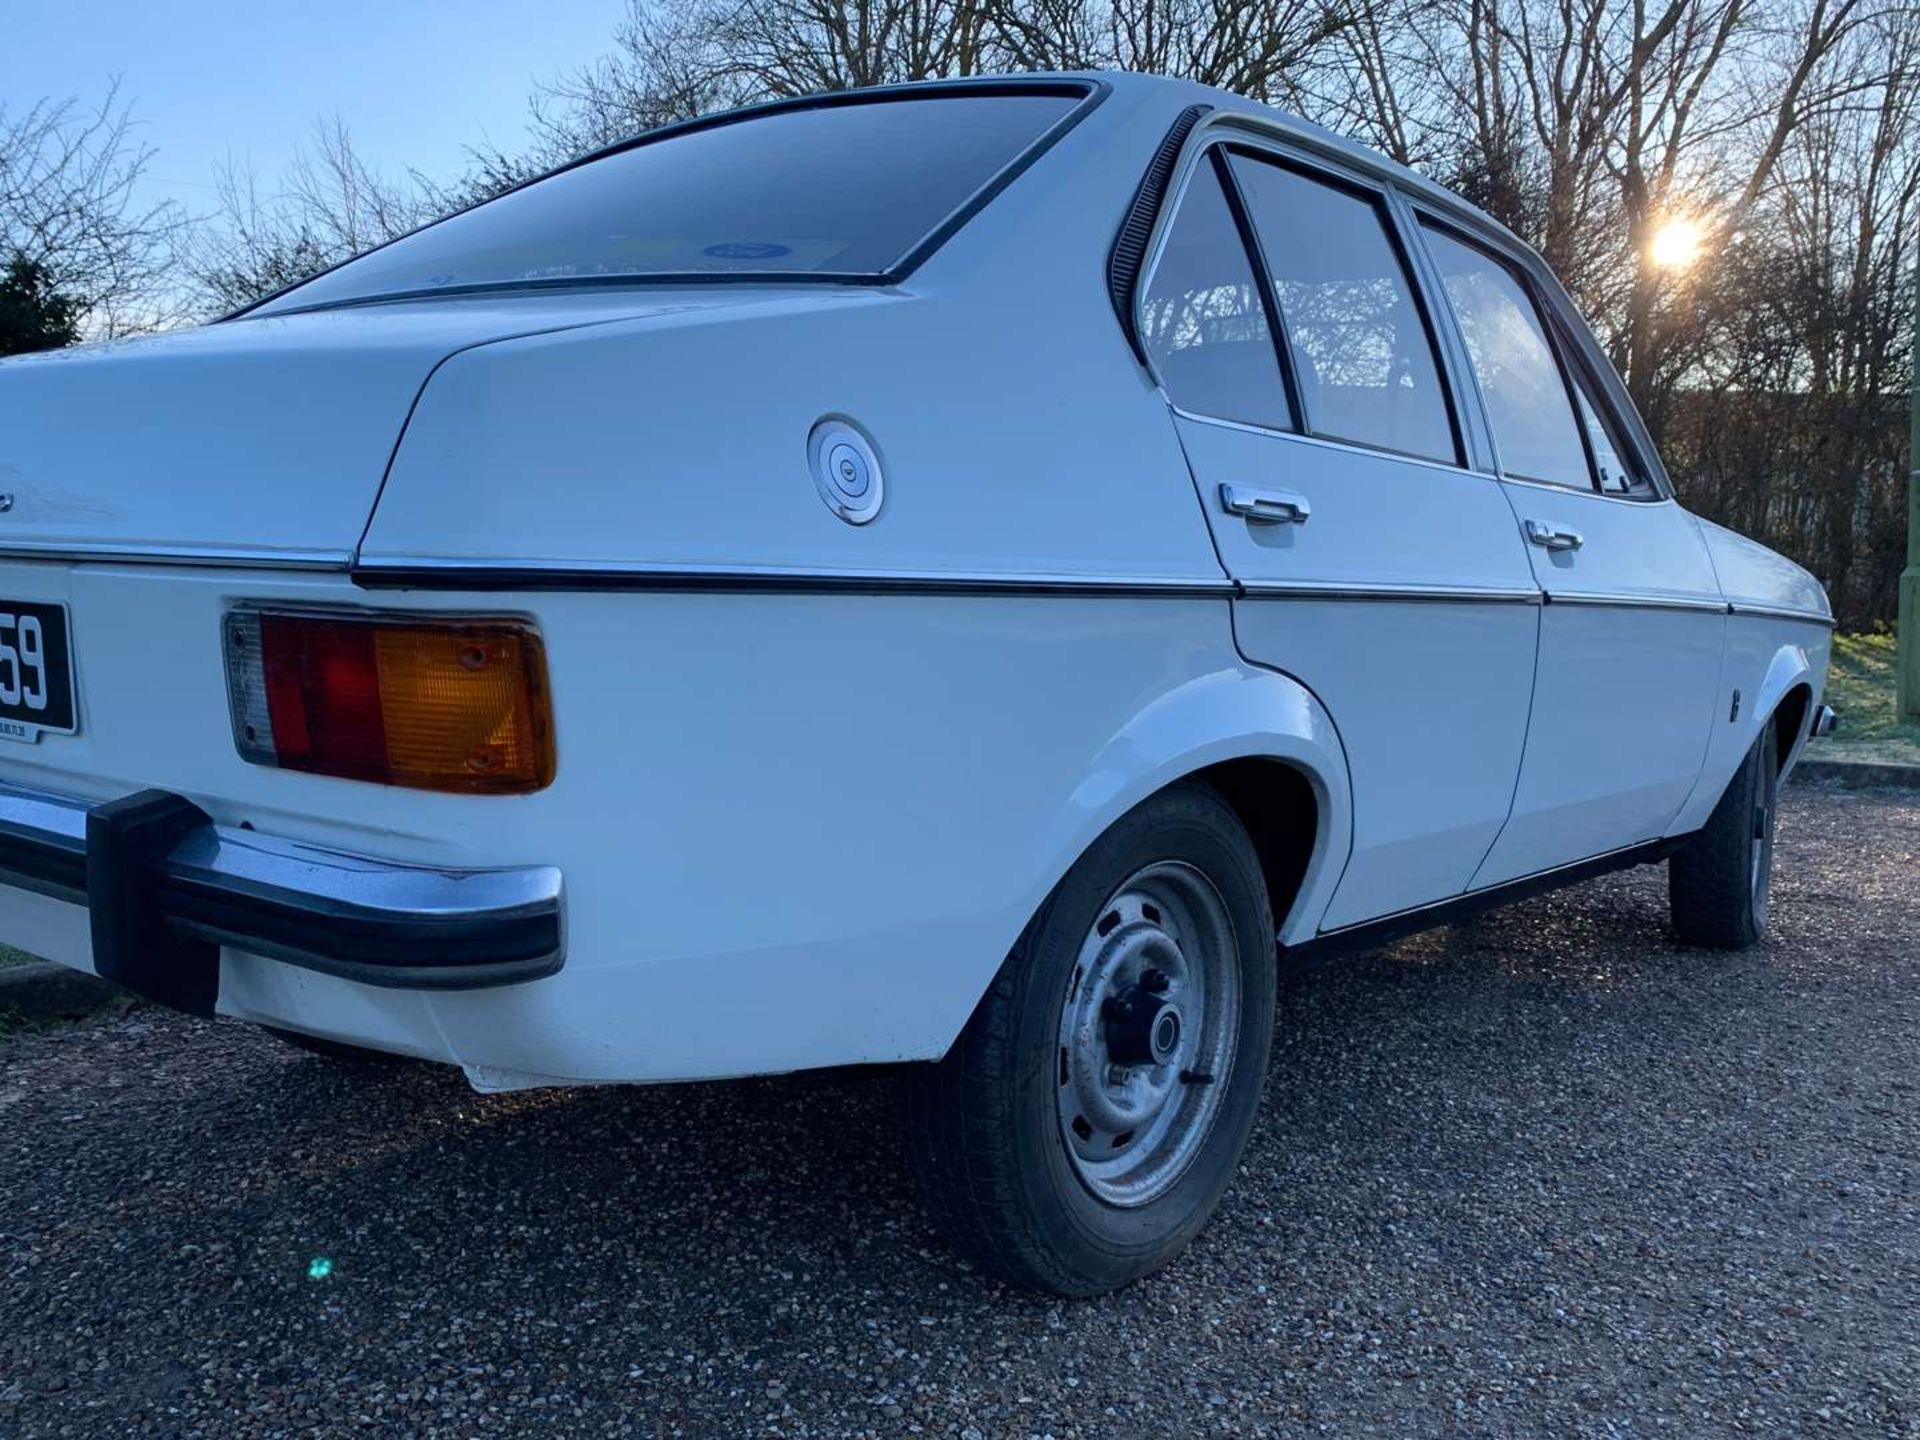 1975 FORD ESCORT GL 1.3 AUTO MKII LHD - Image 23 of 29